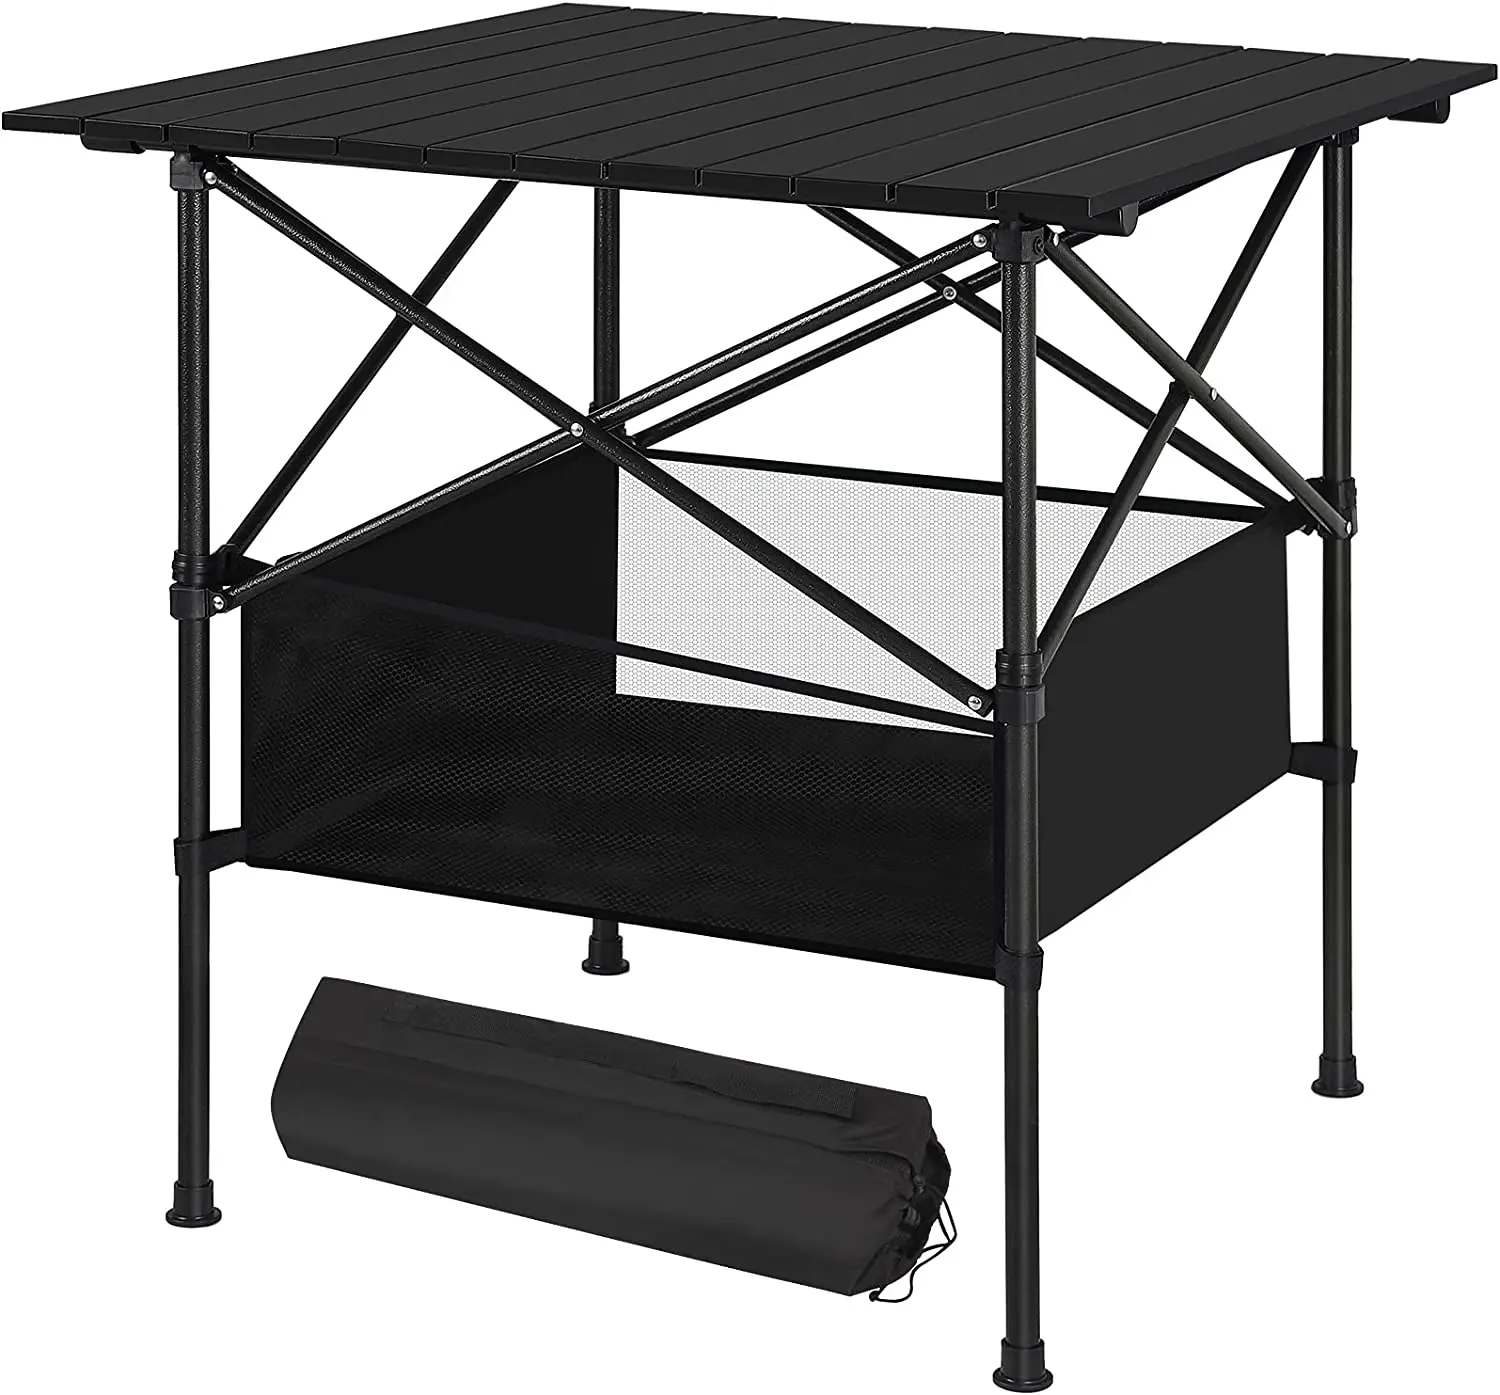 Folding Camping Table - Small, Aluminum, Foldable Tables with Carry Bag 28in x 28in x 28in